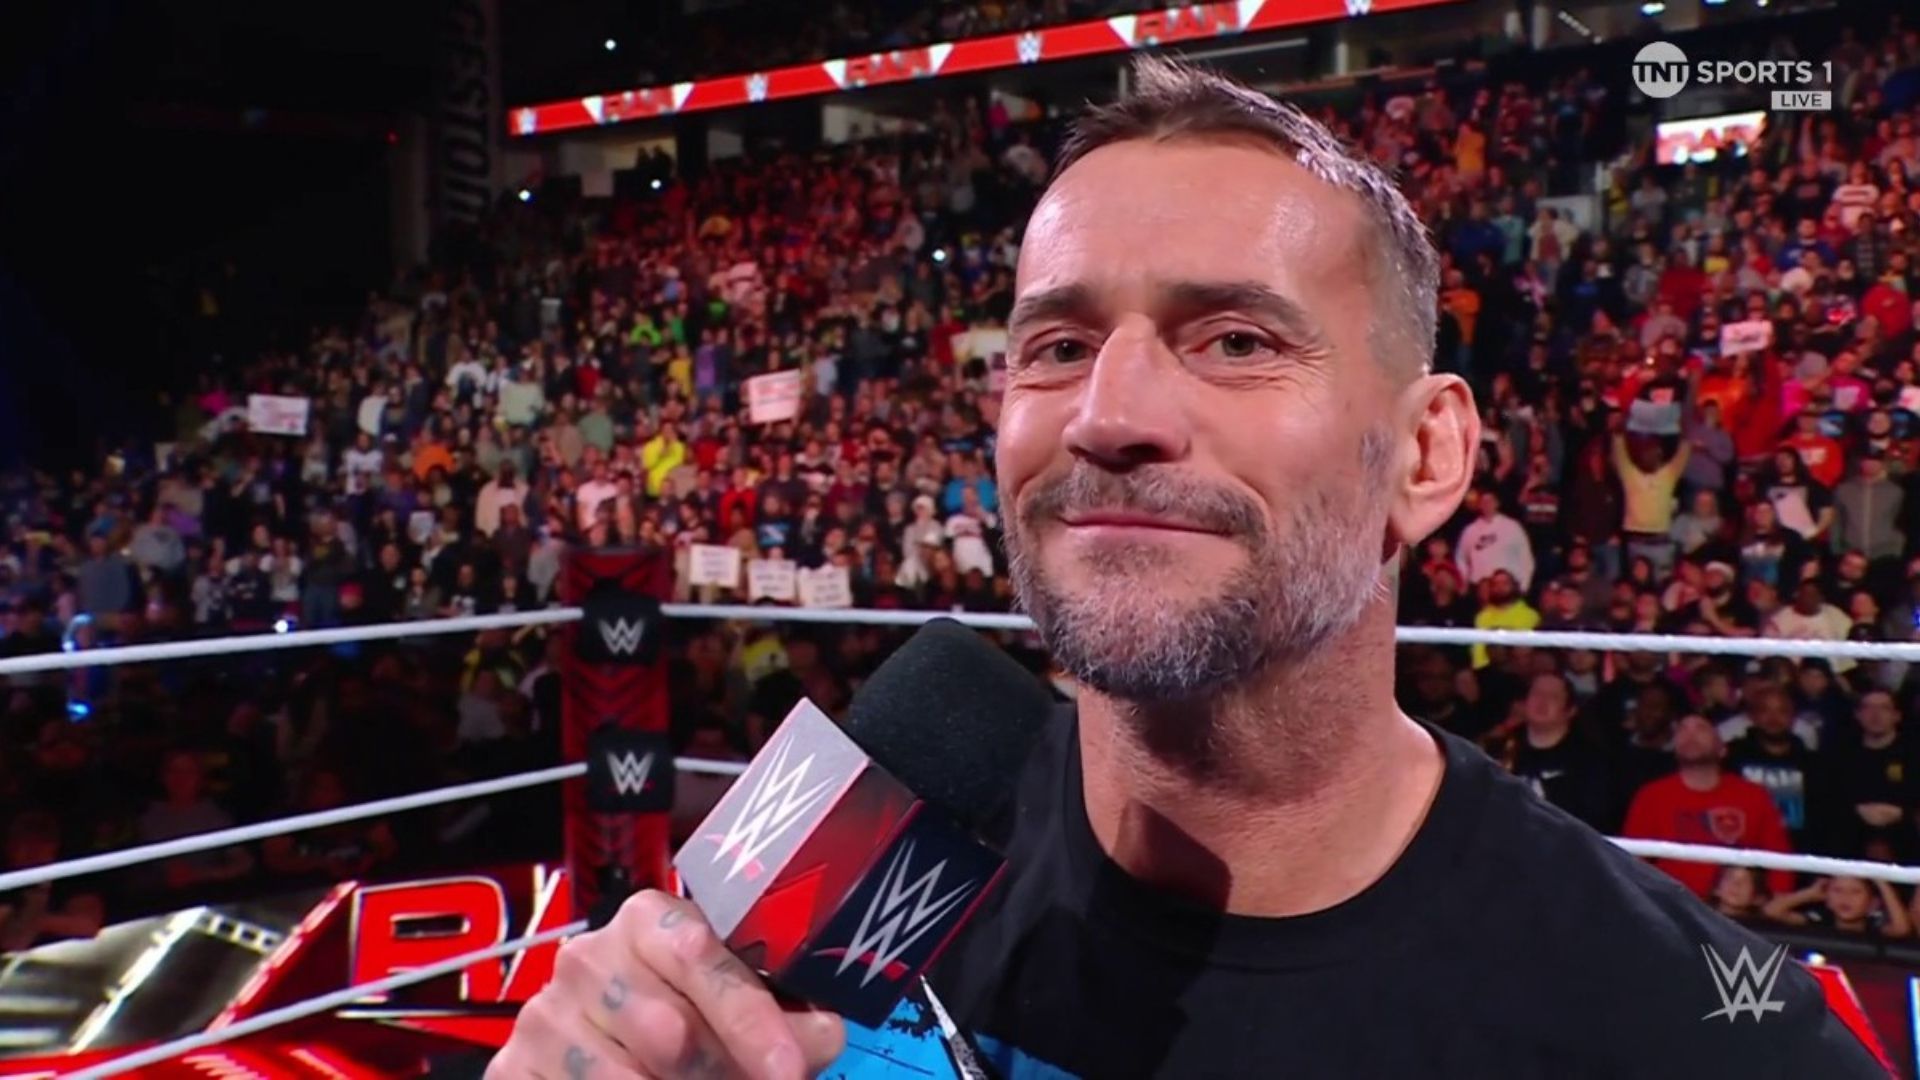 CM Punk has signed with WWE RAW.